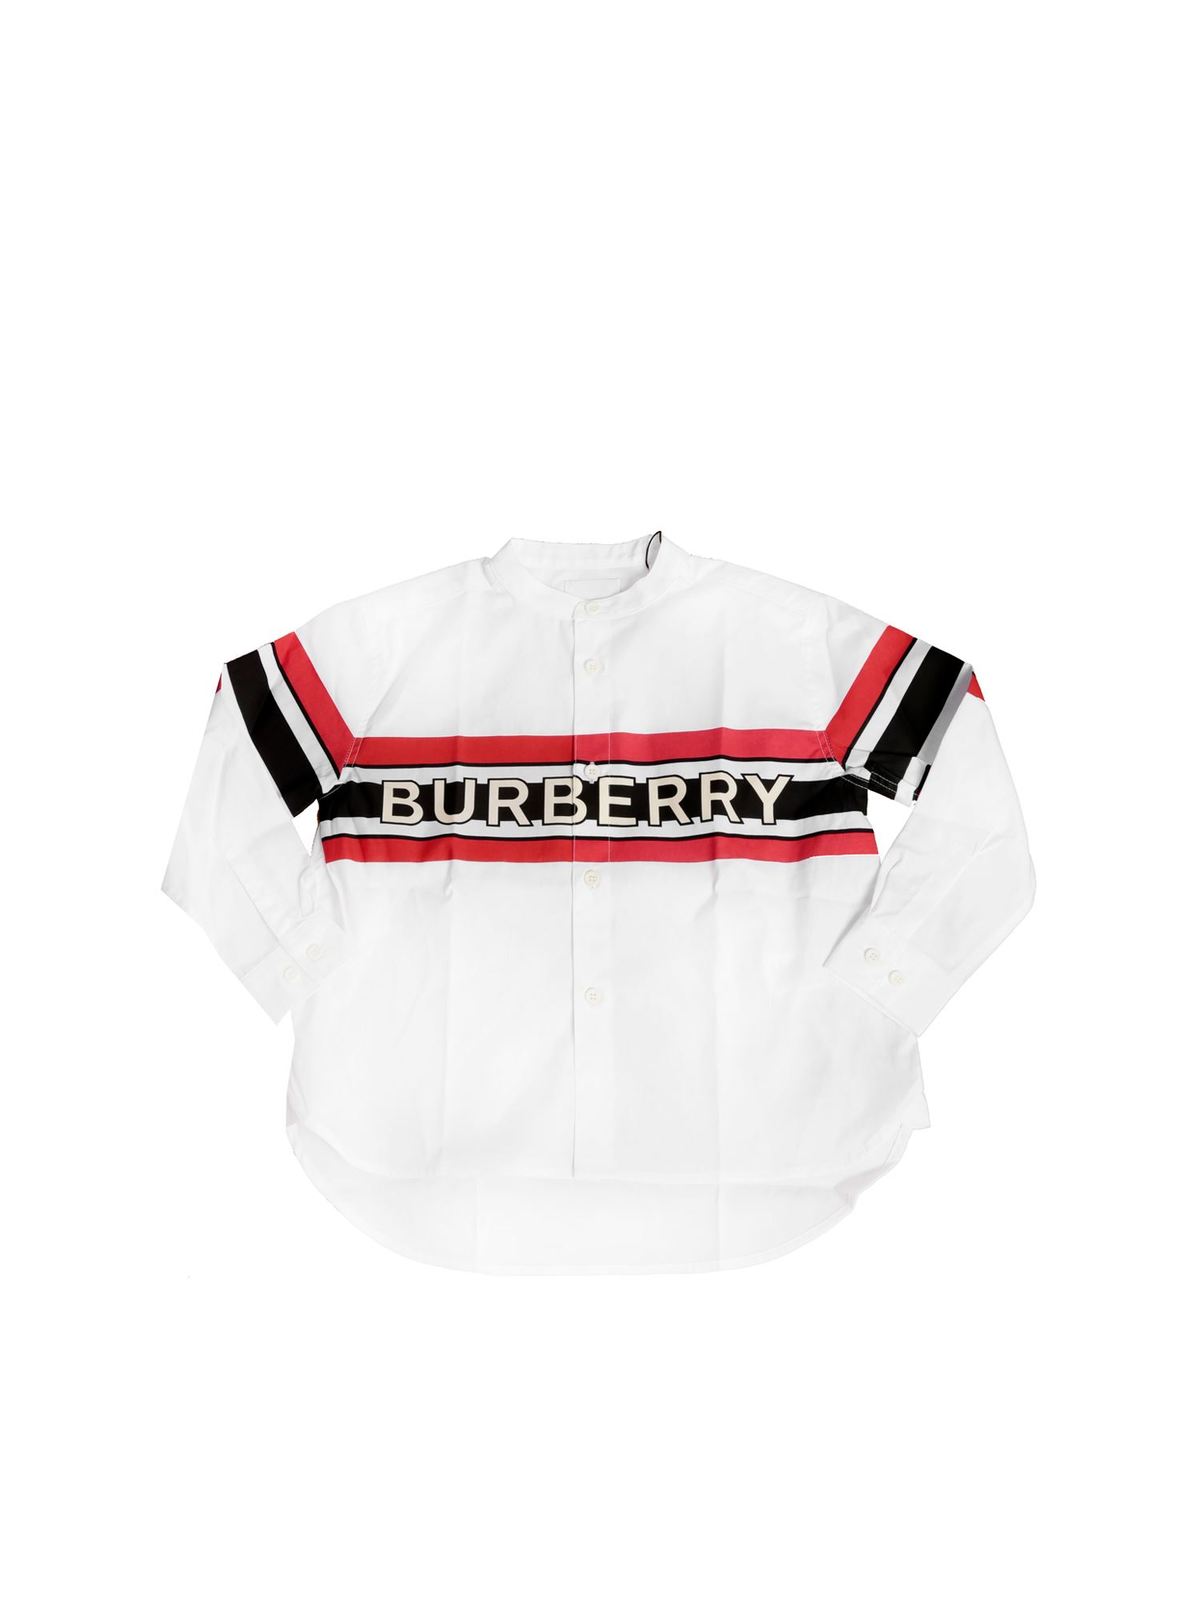 BURBERRY WHITE SHIRT WITH PRINT